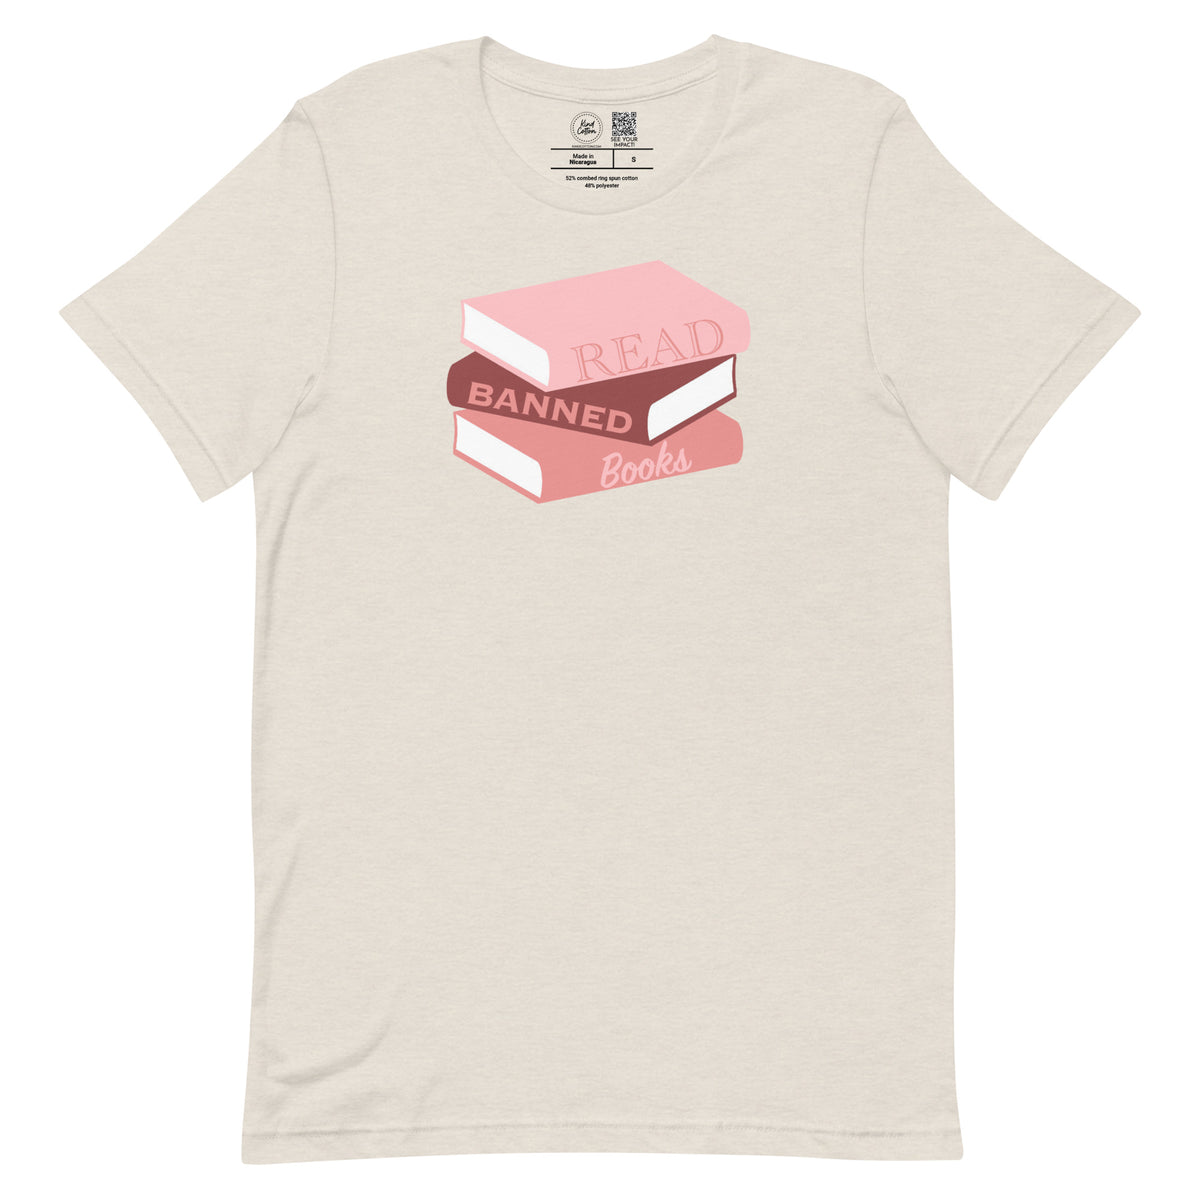 Read Banned Books Stack Classic Tee